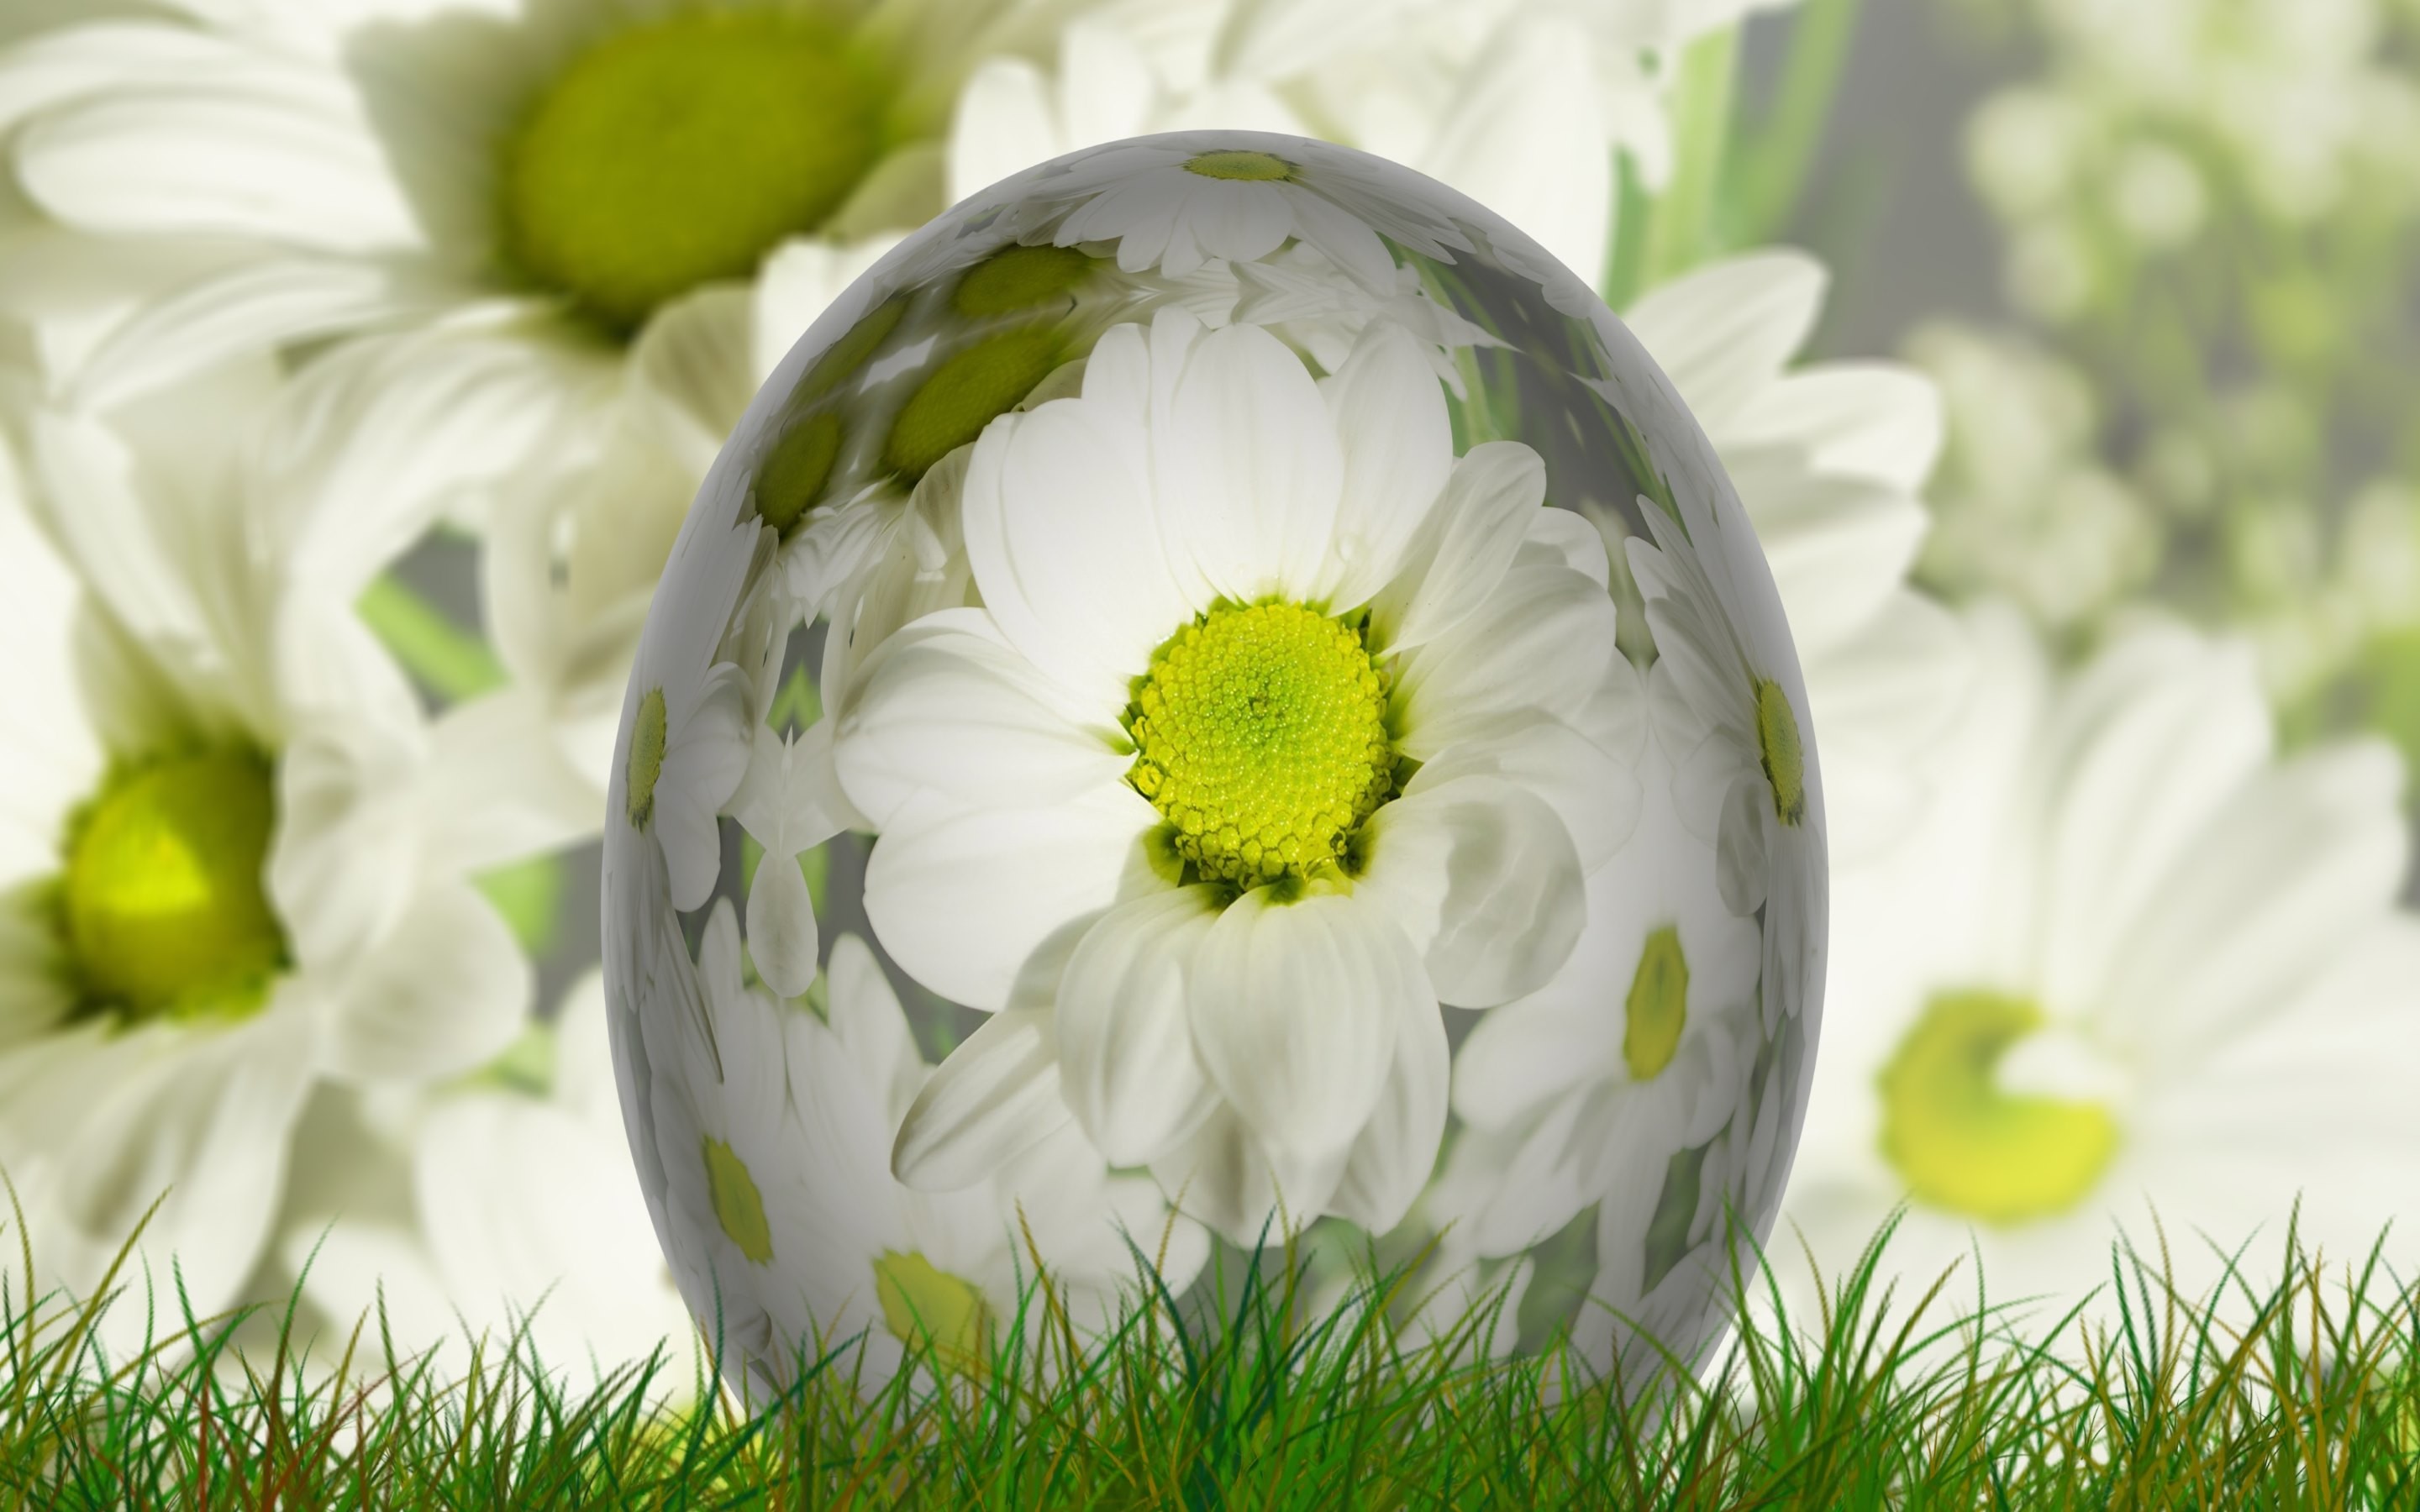 2880x1800 The big Easter egg picture is the creation of graphic designer Gerd Altmann  and by his courtesy is shared free under CC0 license Â· Download the  wallpaper in ...